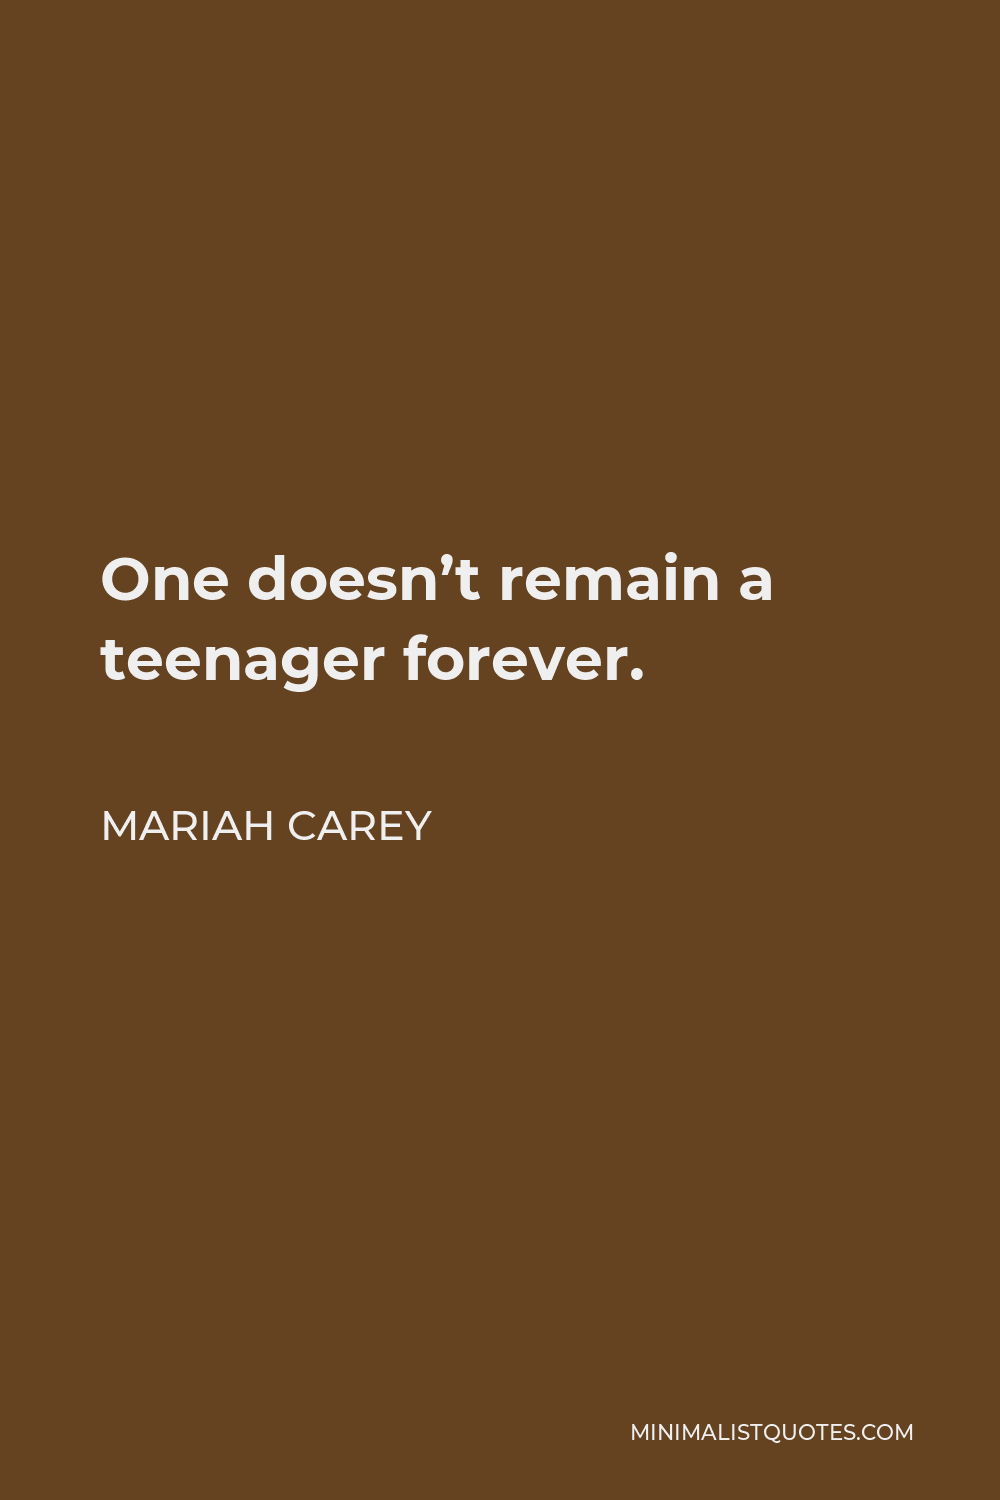 Mariah Carey Quote - One doesn’t remain a teenager forever.